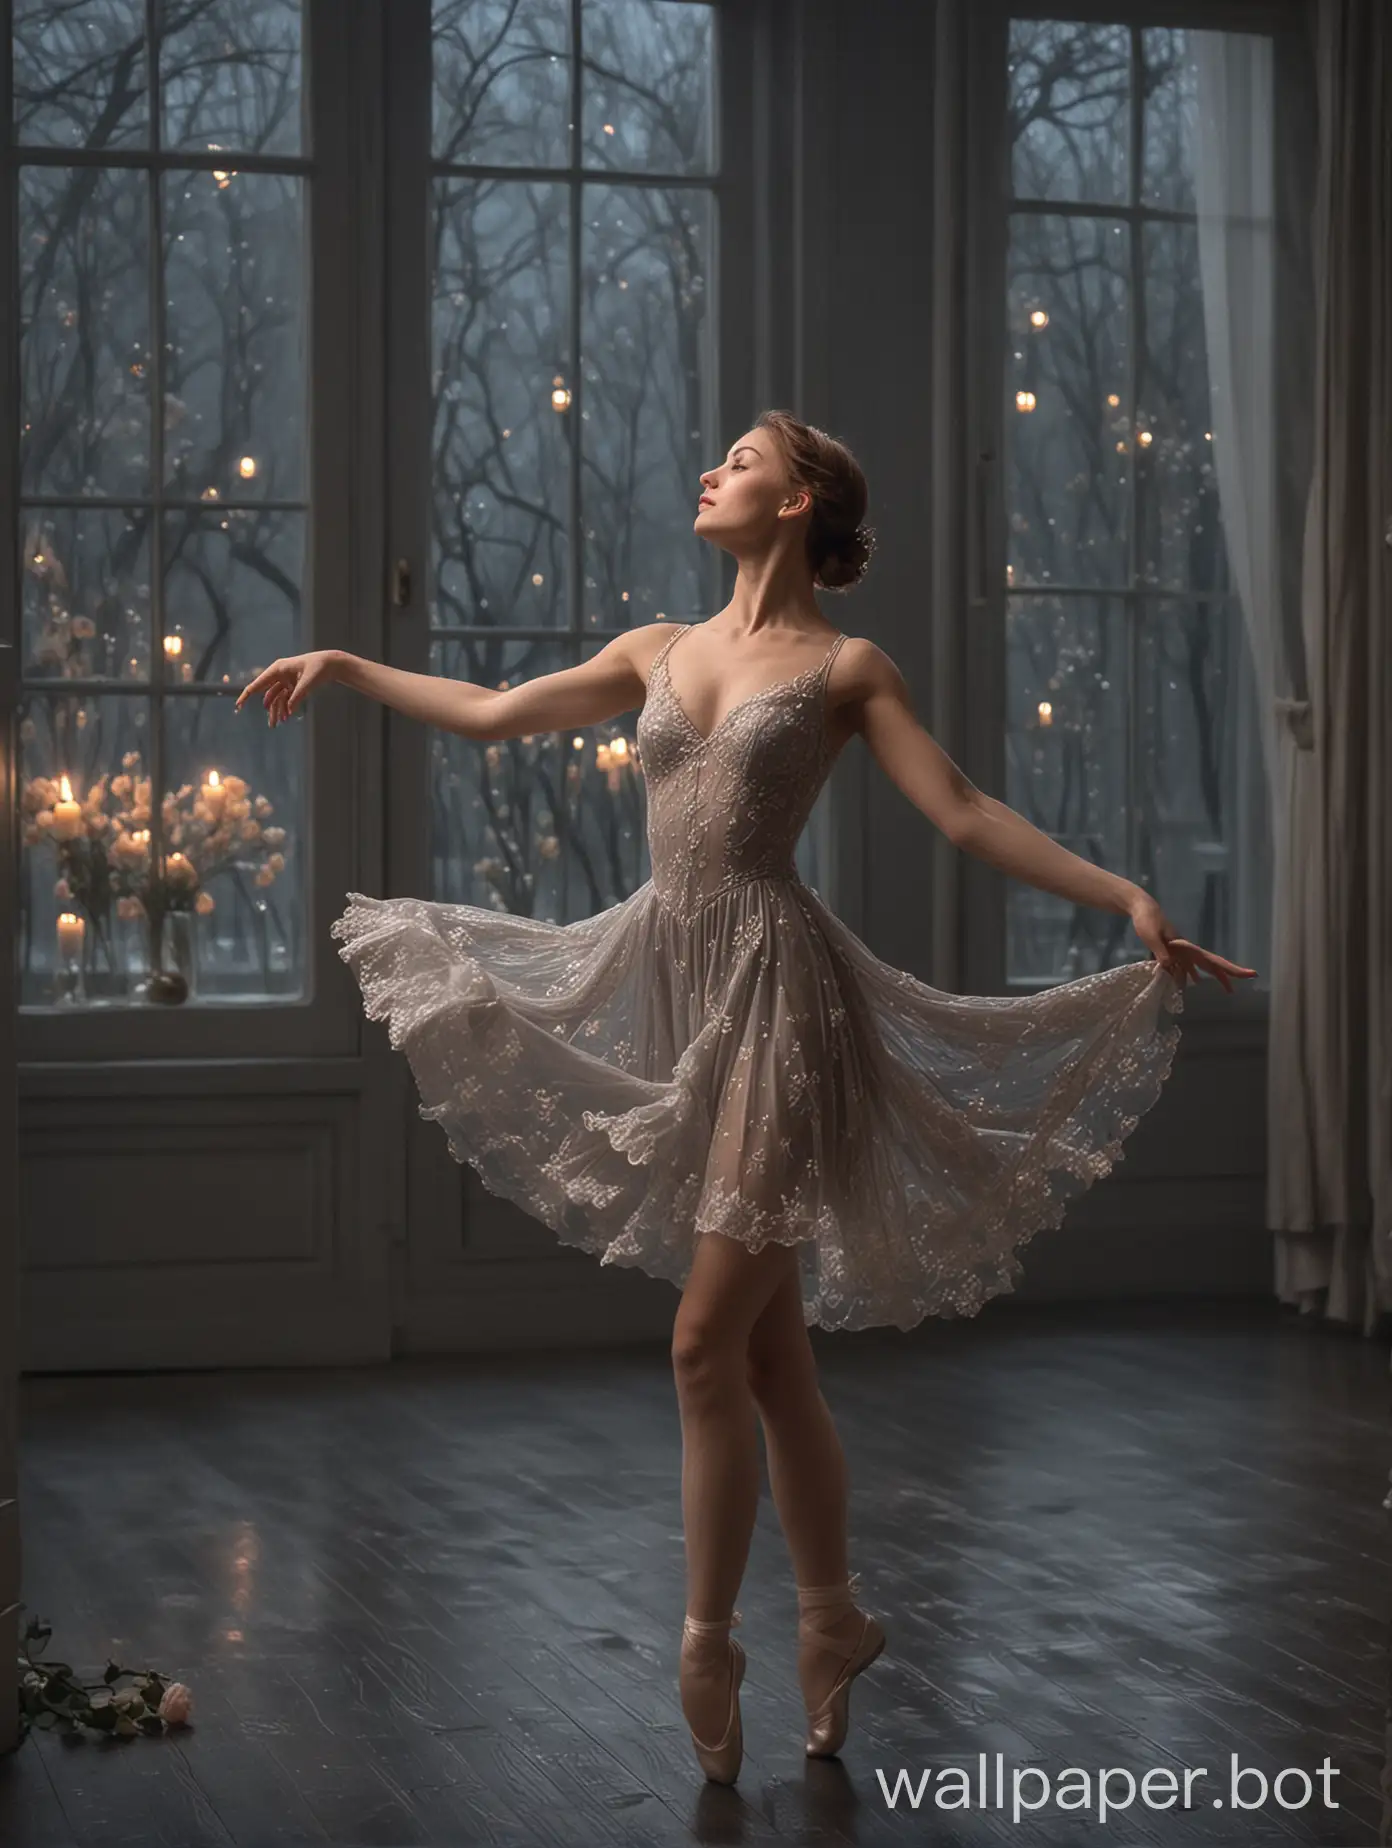 A poetic and visually captivating scene. The image shows a beautiful Russian ballerina with brown hair, medium-sized breasts, delicate makeup, and clear eyes, wearing a gray lace dress (the dress has petal designs and a short skirt). She is dancing ballet alone in a dark room, illuminated by the moonlight coming through a large window. The ballet shoes she wears are white, which highlights her figure and angelic face. This description transports us to a magical and romantic atmosphere, where the dancer is in the center of the room, expressing her art and grace through dance. The combination of the darkness of the room, the moonlight, and the elegance of the dancer creates a visually striking and beautiful image.